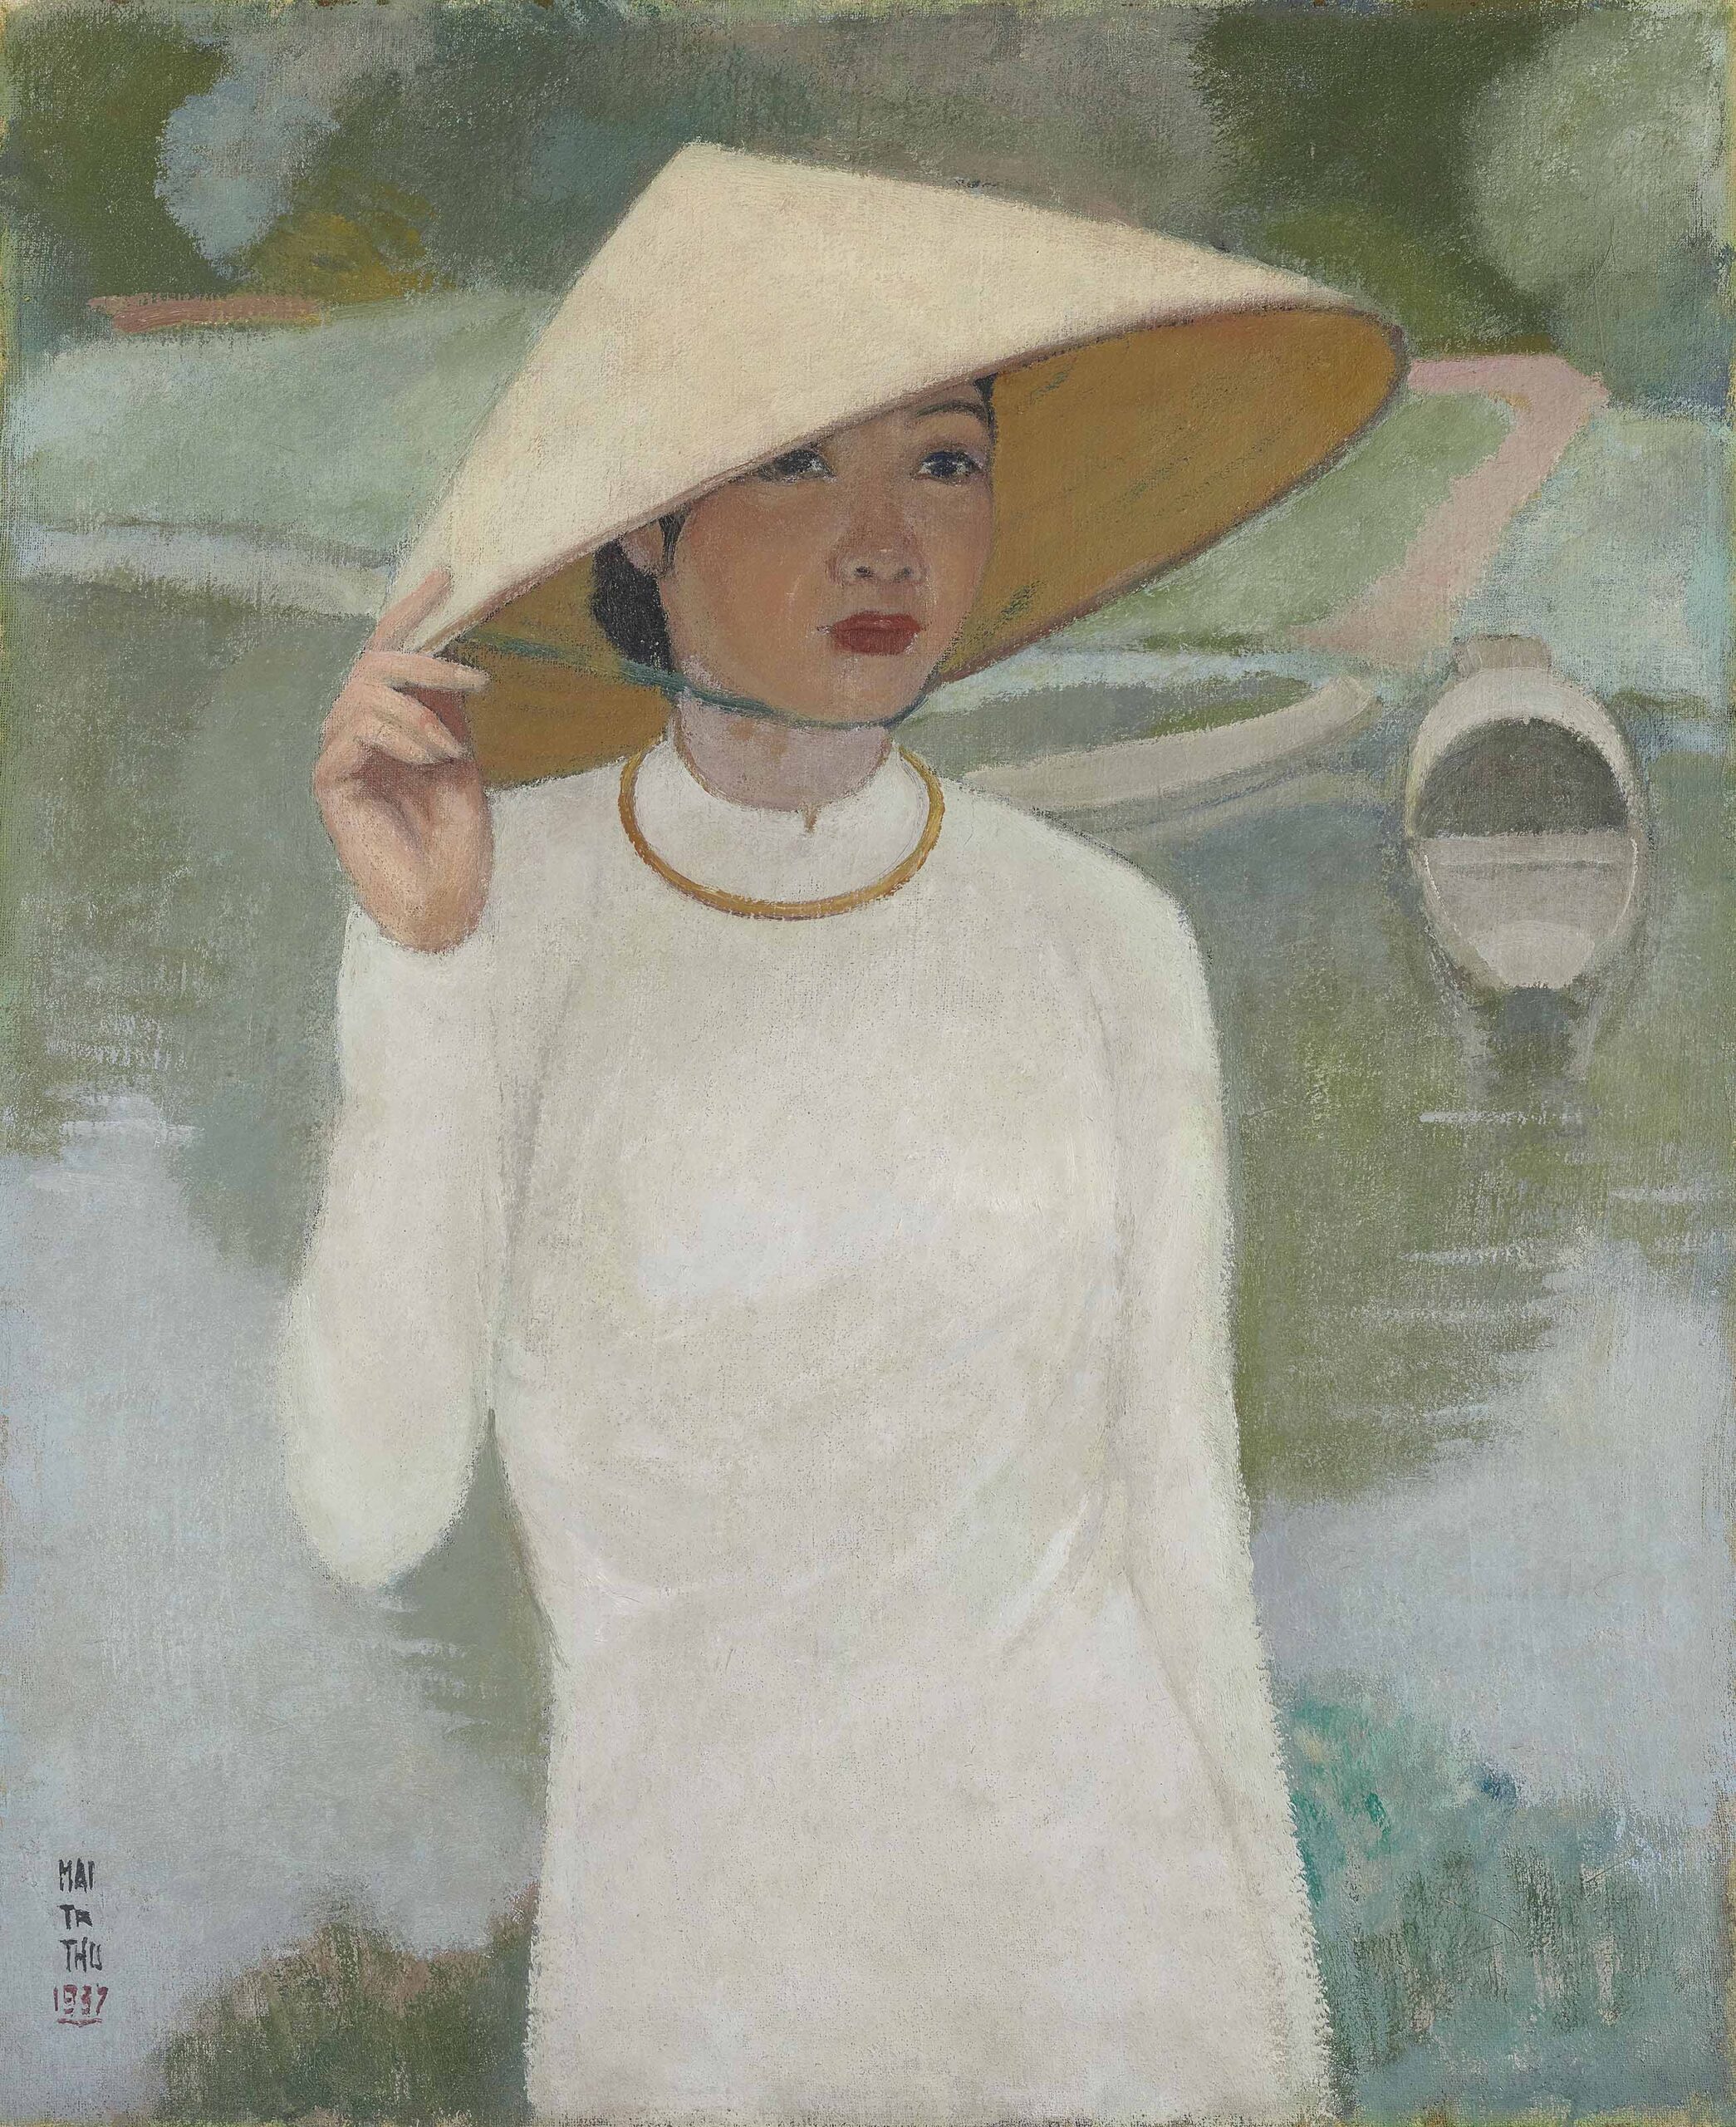 MAI TRUNG THU (1906-1980)
La jeune femme de Hué (Young Lady from Hué)
signed and dated ‘MAI TR THU 1937’ (lower left)
oil on canvas
73 x 60.5 cm. (28 3/4 x 23 7/8 in.)
Painted in 1937


"She is the Mona Lisa of Vietnamese painting.
The mystery of supreme distinction: the immaculate ao dai, the conical hat which serves
more as a crown than a headdress.
The gesture is like a call of grace.
One must have loved passionately to understand what Mai Thu felt for his muse from Huê.
The softness of the Perfume River.
Her charm has stopped time.
A sheer moment of eternity."

MAI THU, LA JEUNE FEMME DE HUÉ, 1937: THE SUBLIME RENUNCIATION

In 1937, Mai Thu's two best friends have already taken a leap: Vu Cao Dam settled in Paris as soon as 1931; Le Pho, after a first visit in France and in Europe in 1931-32, was preparing his return for the Universal Exhibition. 

On the other hand, Mai Thu, in this year 1937, had been teaching at Hue High School for several years. Platonic love or more we will never know but Mai Thu is madly in love. In love with one of his students. 

She appears on this extraordinary oil on canvas presented here. Setting, lighting and the lady herself, all bathed in grace and distinction. The place: probably the bank of the Perfume River, not far from the Thien Mu pagoda, where beauty and solemnity compete. The light, so particular to the River, envelops our beautiful lady.

She is dressed in a white ao dai - the color of respect - usually worn when one goes to the pagoda. Mai Thu uses a luminous white almost scintillating, applied as if it were an extension of the water to also enhance the light sway of the young girl. Her right hand slightly touches her conical hat, reminding it to protect her diaphanous face from the sun's rays. A simple torque enshrines the grace of her neck. With her eyes looking in the distance, she allows the artist to capture her and her distant charm so suitable to the young ladies of the time and place. Her face, full of absolute determination, expresses a maturity firmly asserted by her crimson lipstick and her made-up eyes.

The small boats are at quay, will they stay here or will they sail towards the middle of the River for the lovers to escape eyes and ears? 

Technically, the absence of flat colours allows subtle shades of tones, thus balancing the composition of the painting. But La Jeune Femme de Hué, in this year 1937, is more than an absolute masterpiece. It is the manifesto of an exceptional artist who takes his destiny into his own hands. 

Therefore, he will leave all their world behind, his and hers, to conquer the West. Only taking with him his talent and the memory of this woman here, this Vietnam here.

Alchemy of the universality of art, he will also give up the technique of oil on canvas - imported from France - to devote himself exclusively - in France - to gouache and ink on silk, a Vietnamese technique he takes with him. 

To continue his quest without denying himself, to renounce what should have been the perfect dream of an ordinary man: the act is sublime. It will be legitimized by the universal success of Mai Thu. He will be guided all his life by his "Lady of Hue"...

Jean-François Hubert
Senior Expert, Vietnamese Art